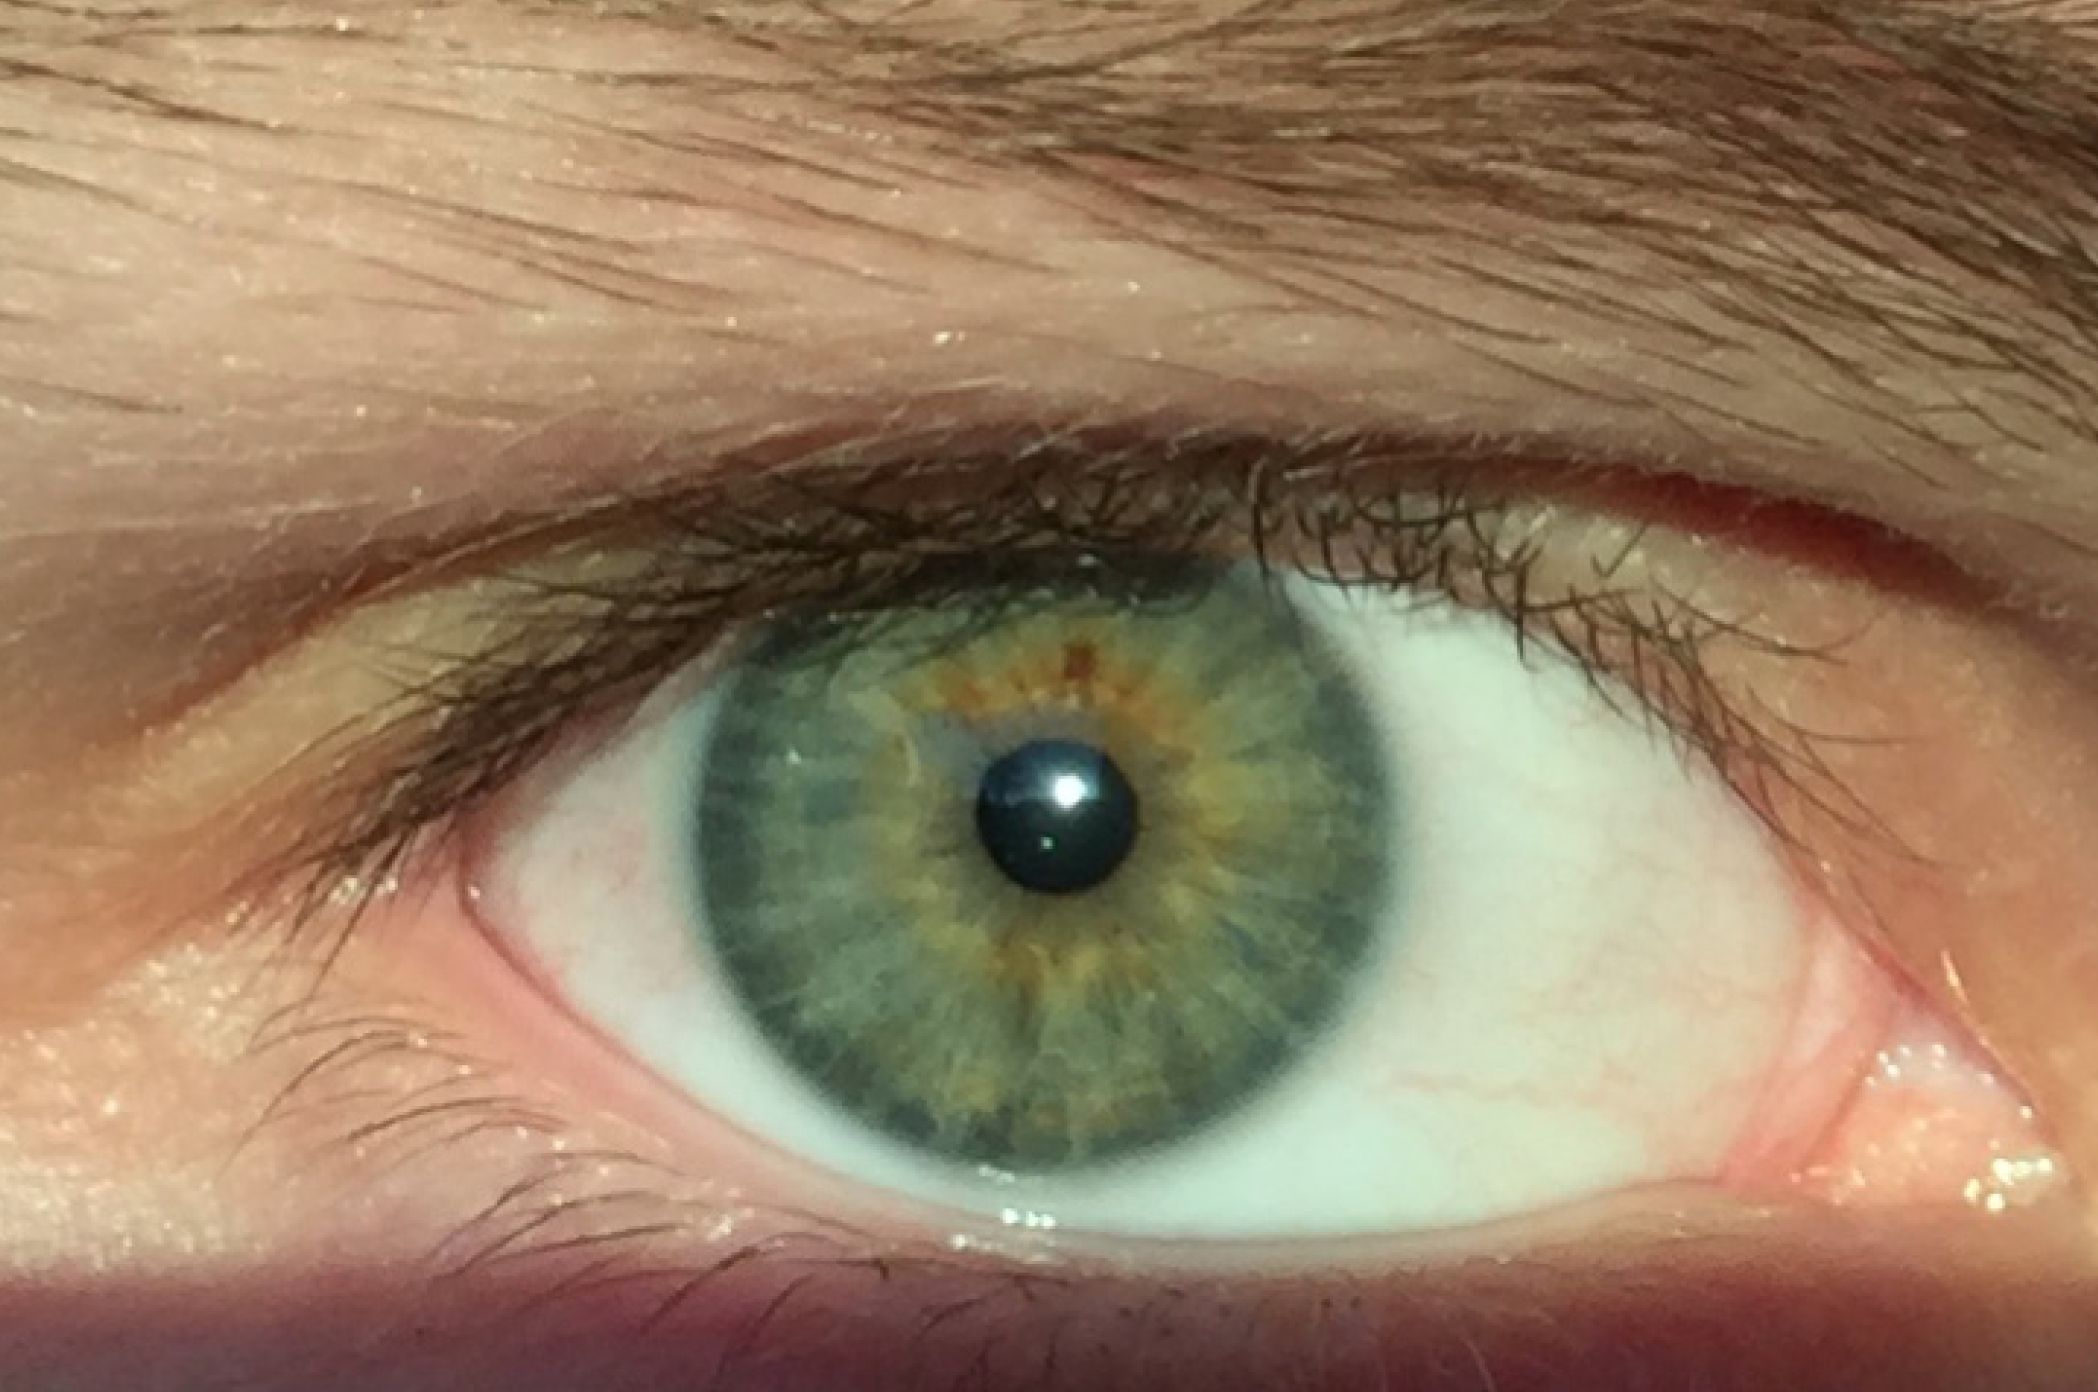 File:Human-eye-color-green.png - Wikimedia Commons